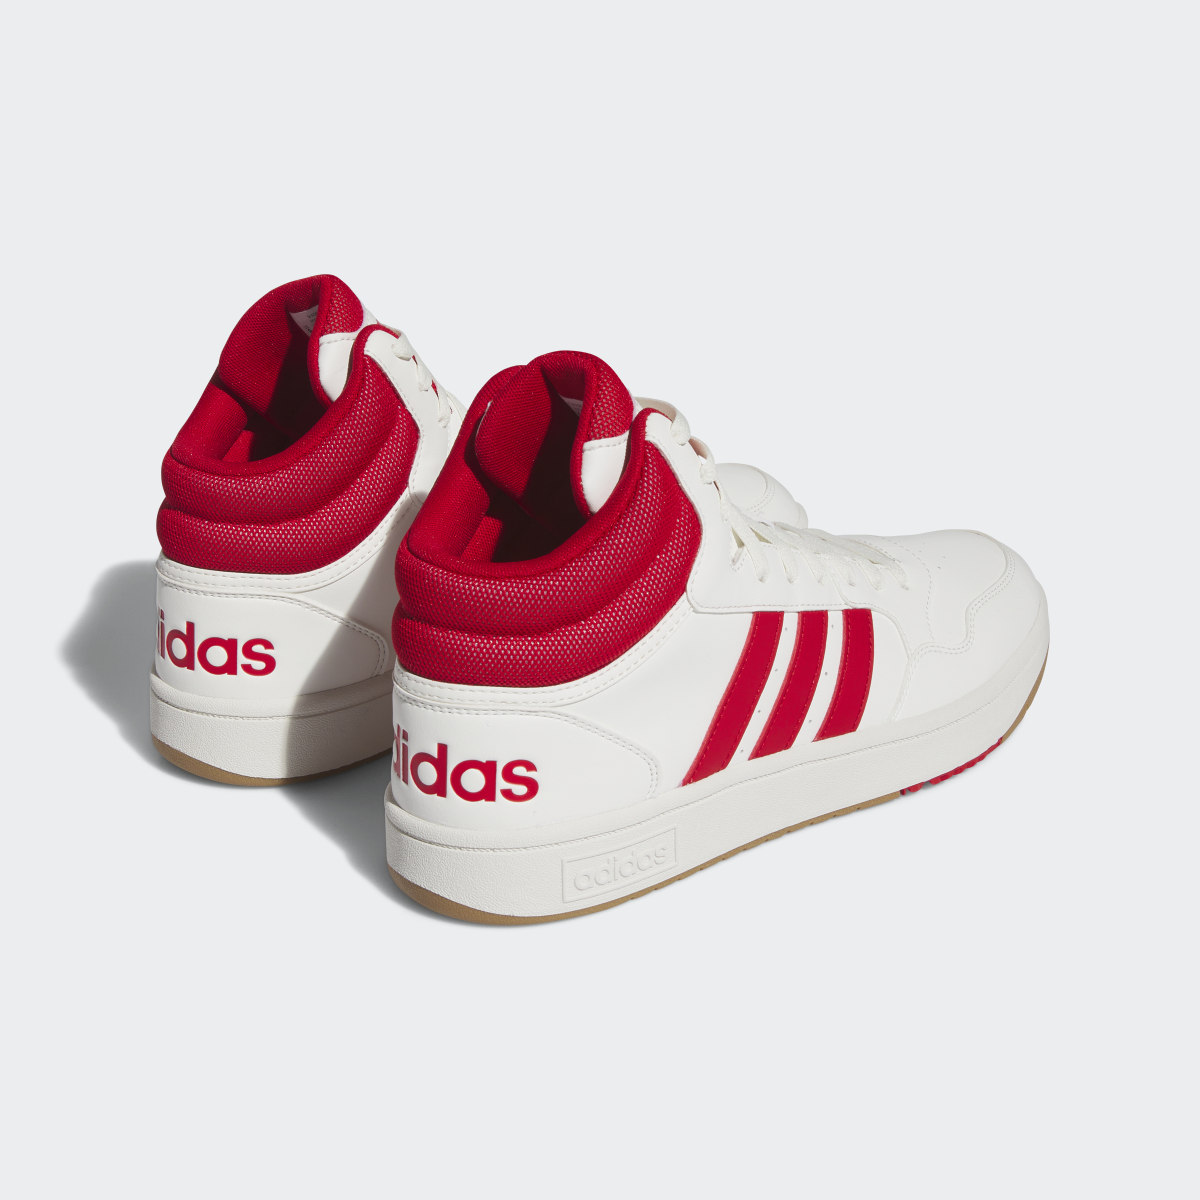 Adidas Hoops 3.0 Mid Classic Vintage Shoes. 6